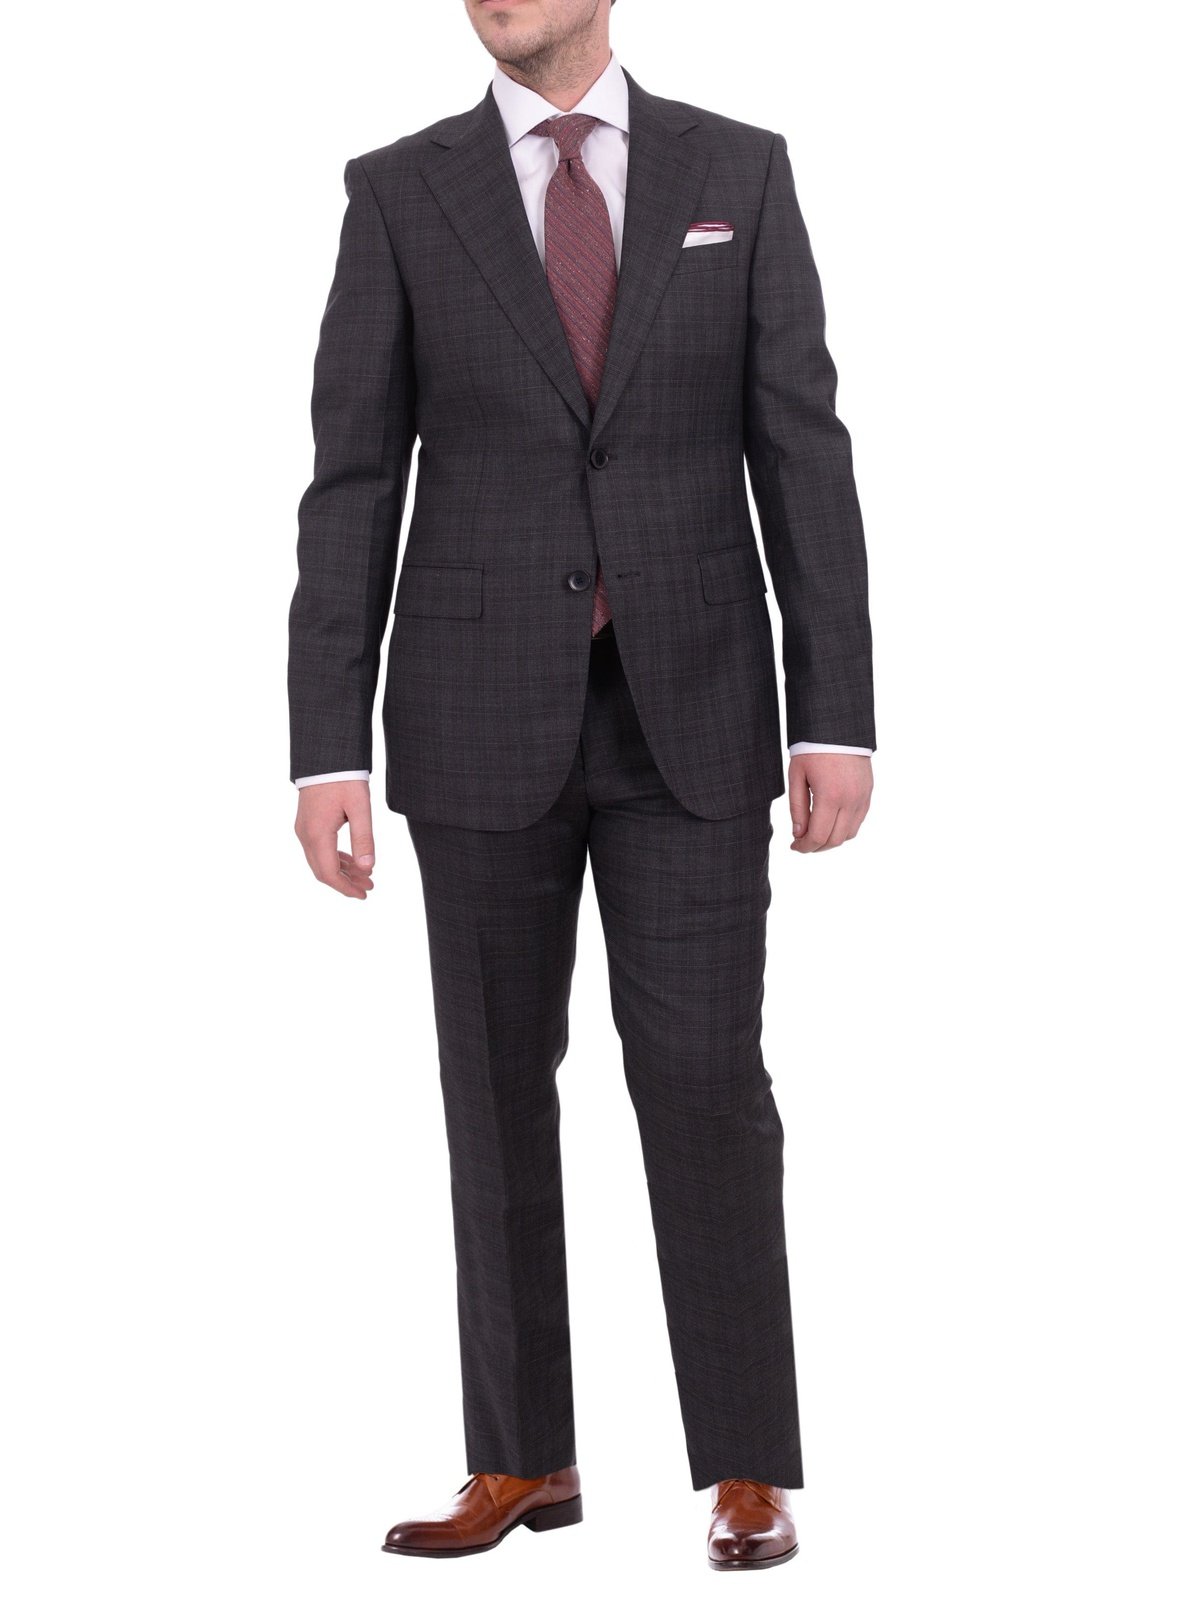 Napoli TWO PIECE SUITS Napoli Slim Fit Charcoal Gray Plaid Half Canvassed Super 150's Wool Suit